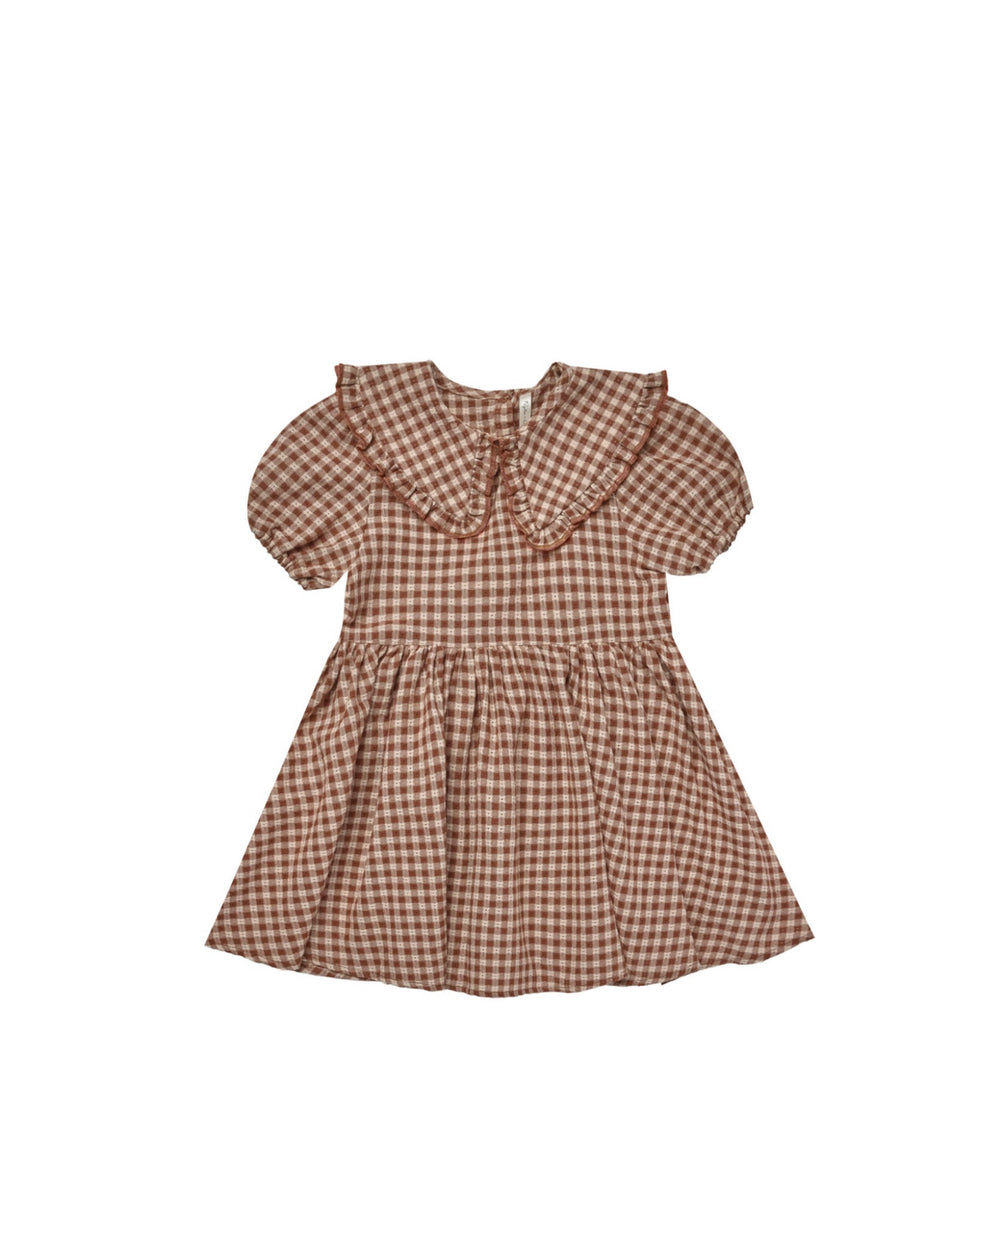 CAMILLE DRESS || BROWN GINGHAM